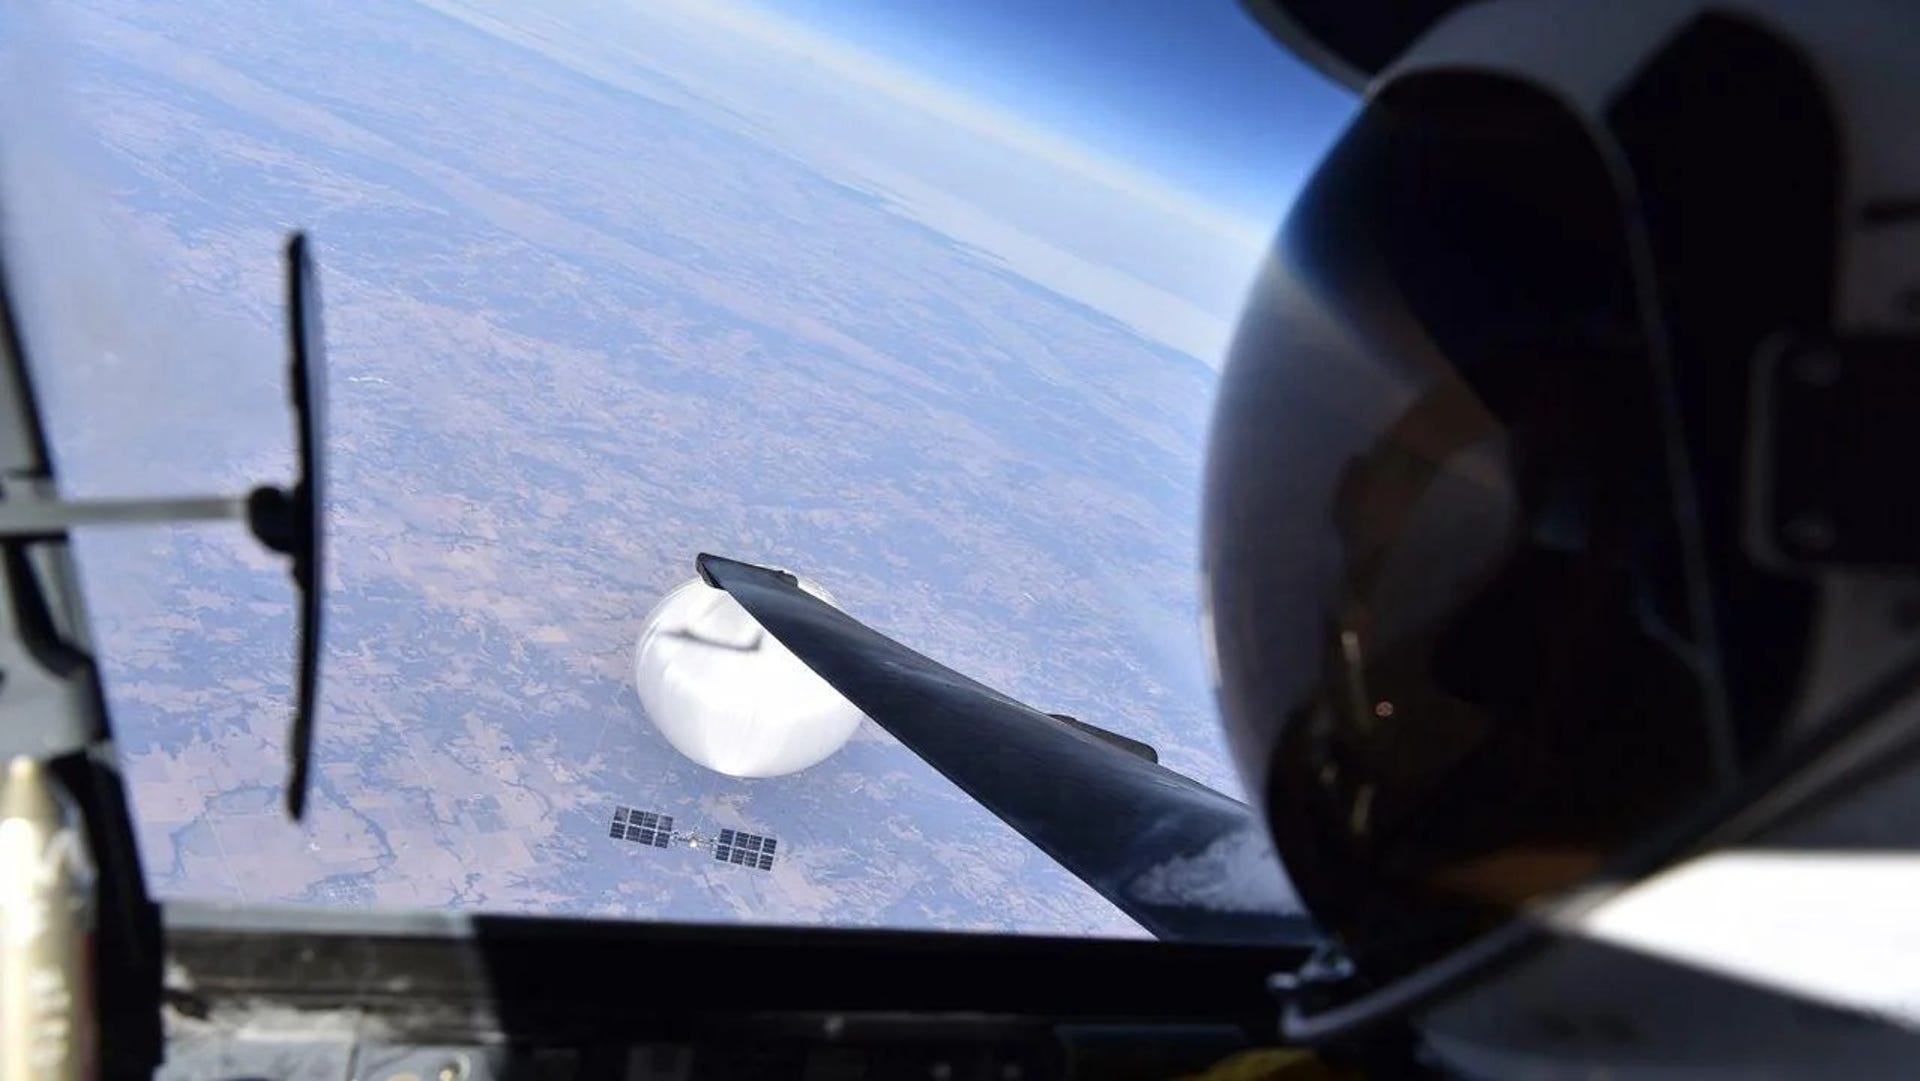 A pilot's black shiny helmet seen from the side with view forward through the window of a U-2 plane. A white round balloon floats over the US with a solar-powered payload dangling below it.